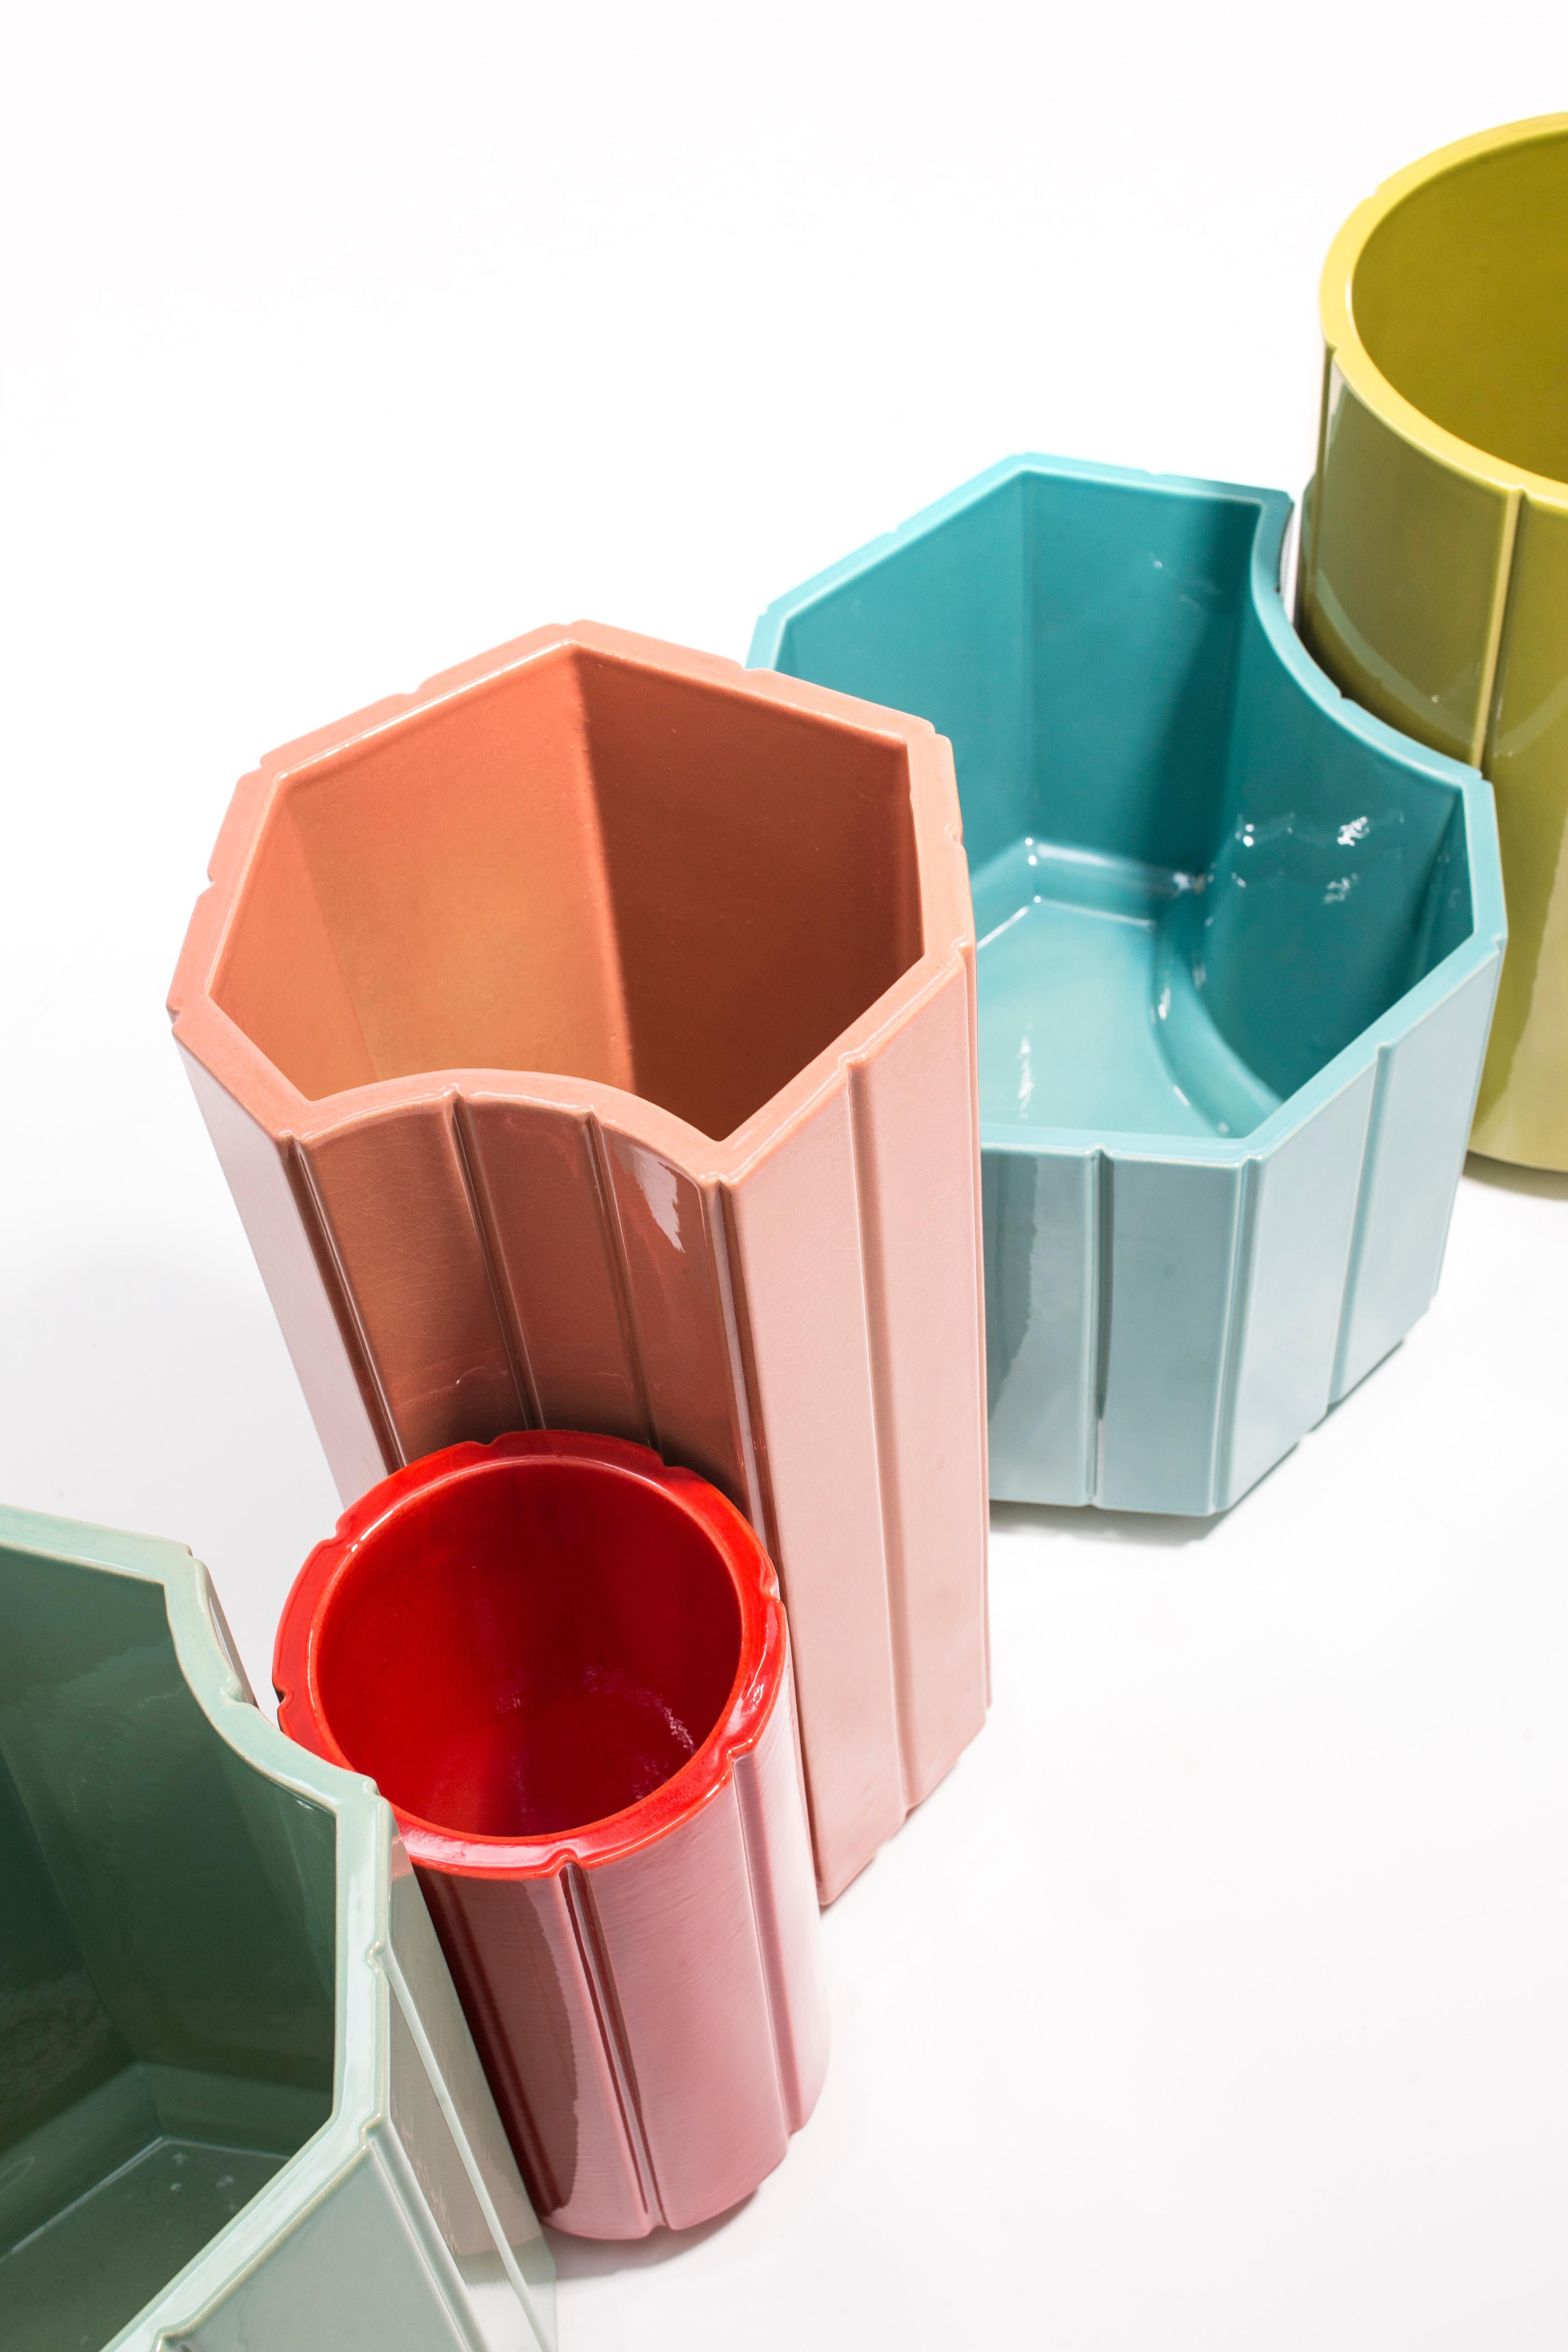 The landscapes vases are conceived in glazed ceramic with dense and vivid colours. Every element, every cell put on the ground composes the detail of an urban and graphic landscape. The scenery envisions the idea of the garden: a composition that